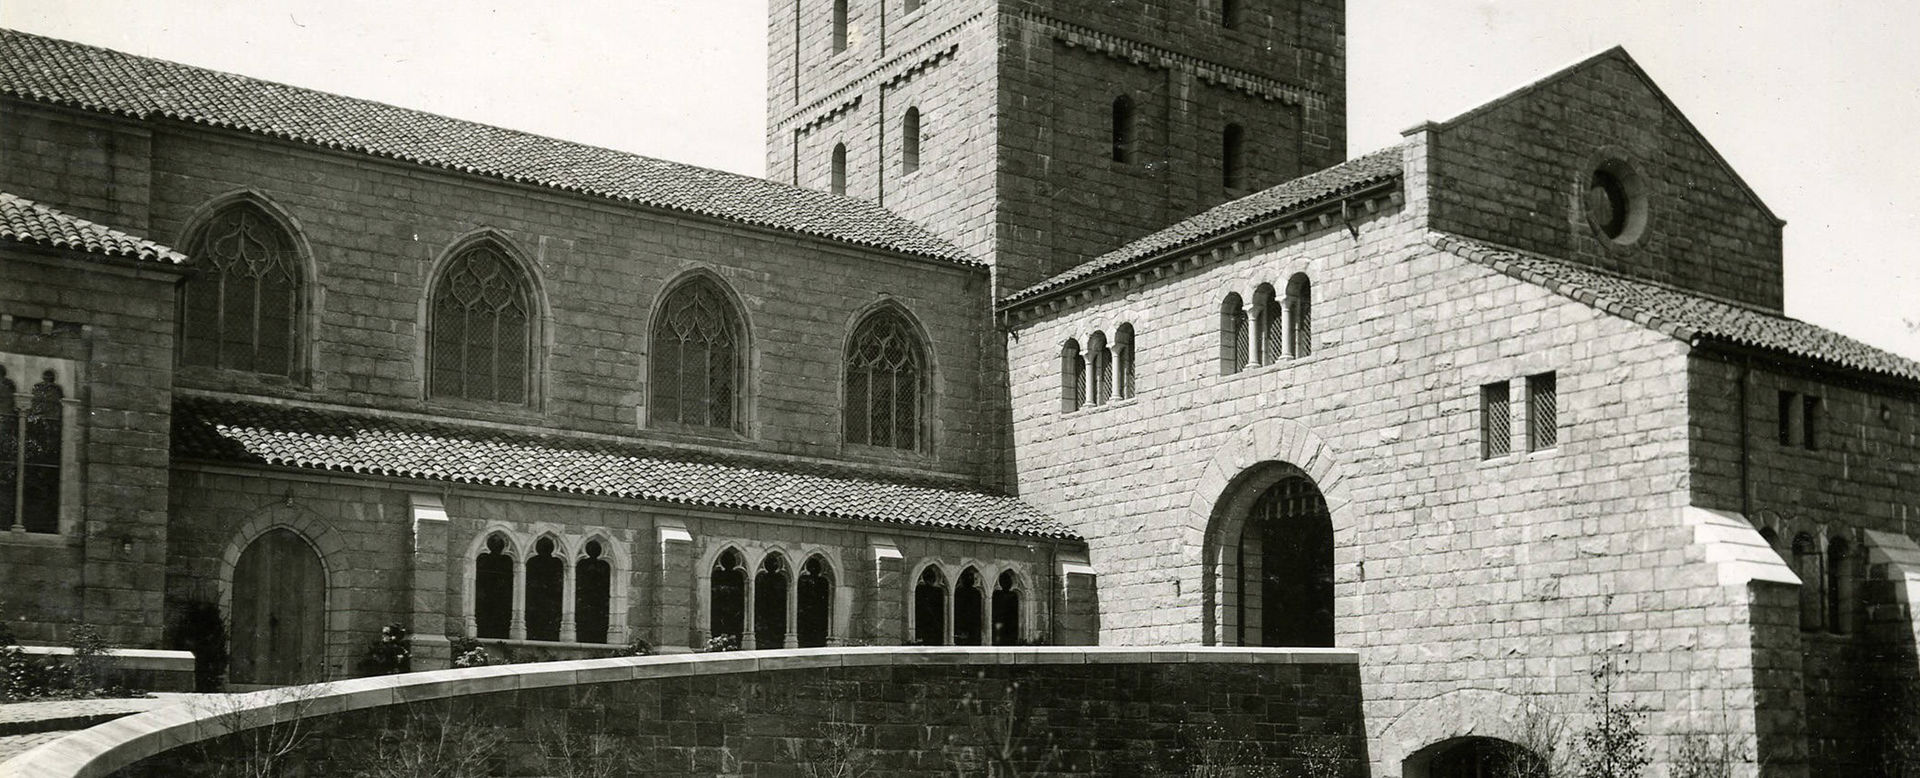 a black and white photograph of the Cloisters building exterior